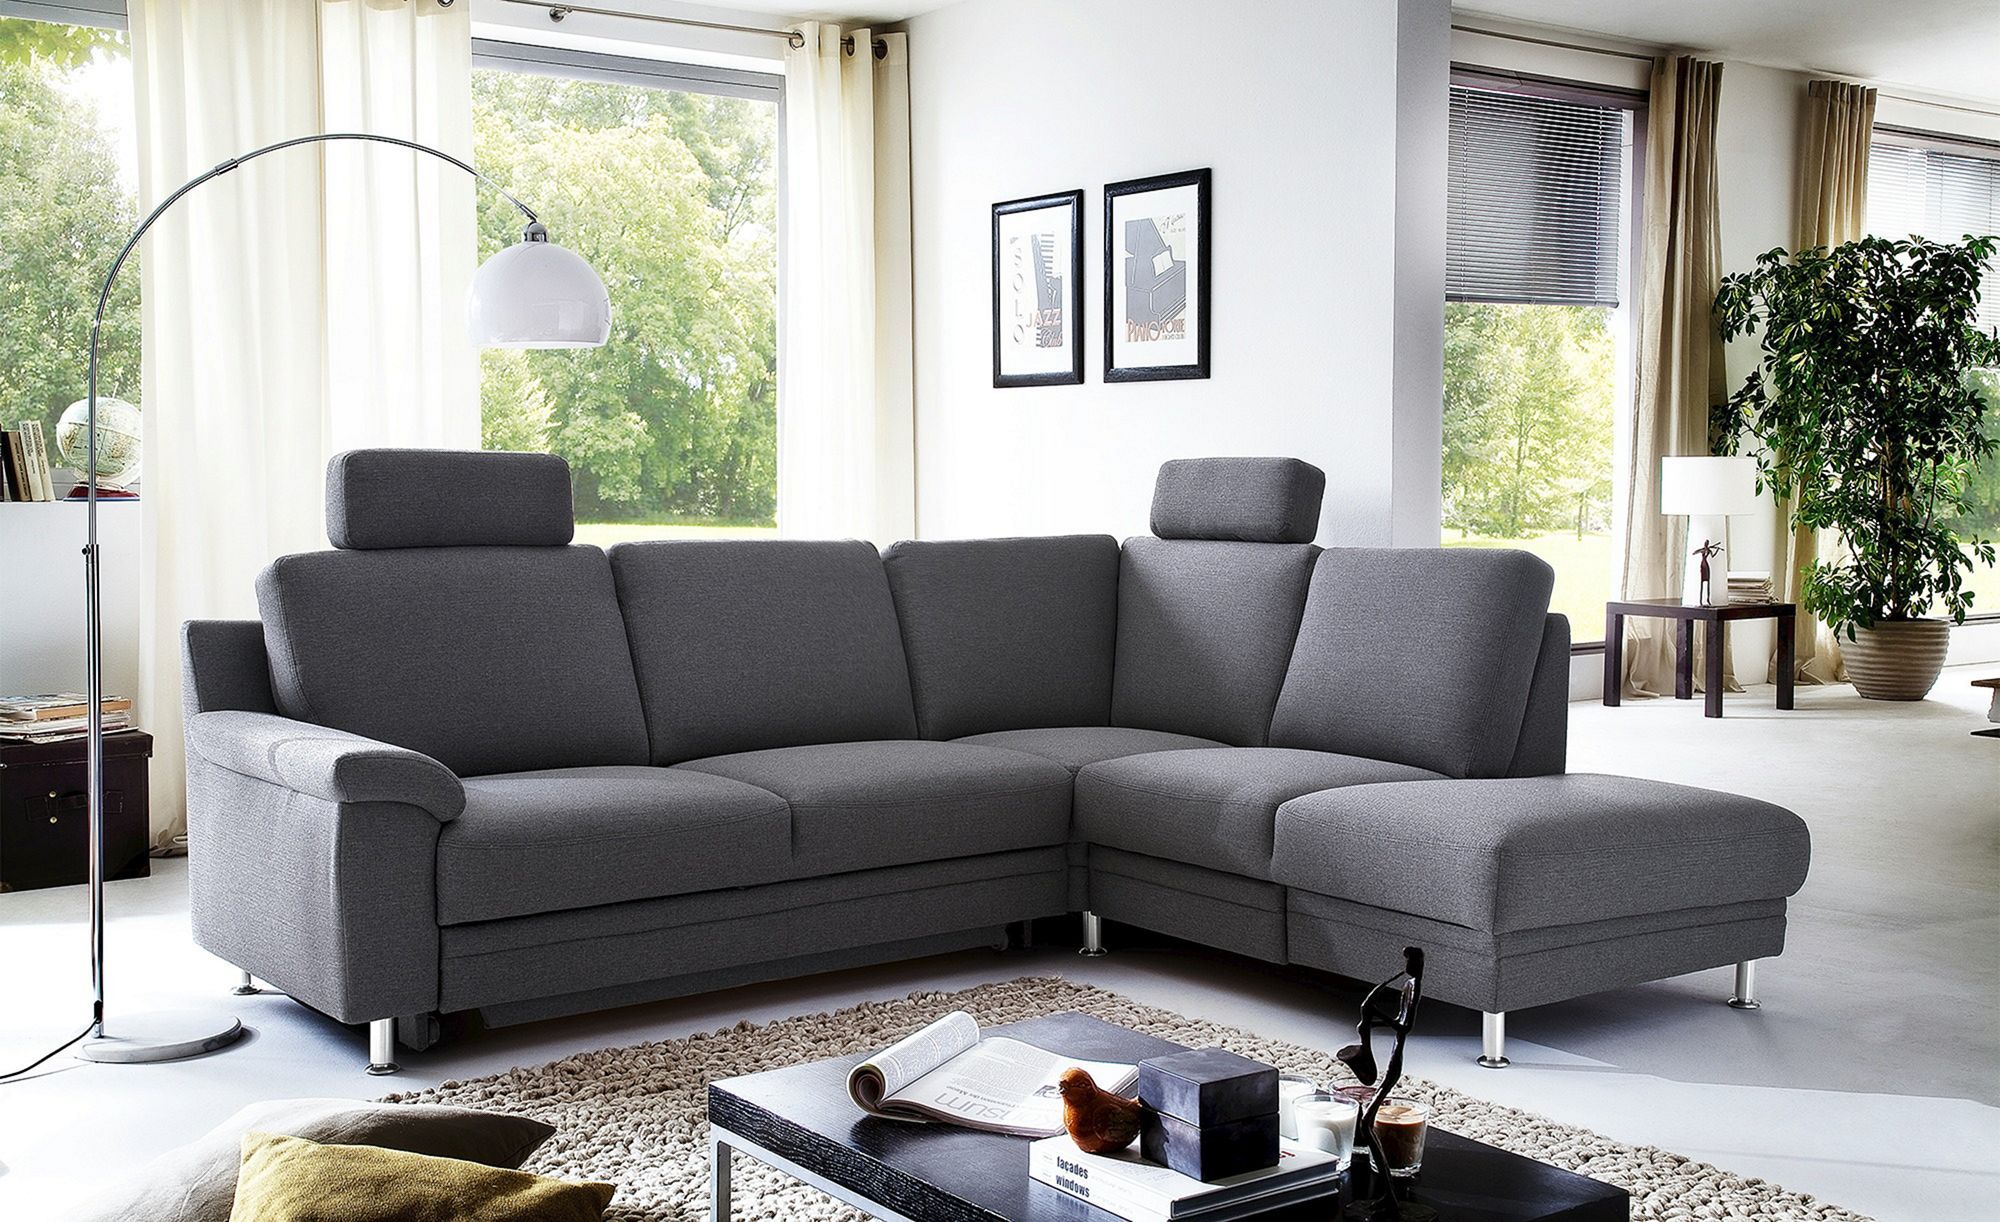 Sofa Colors and Styles